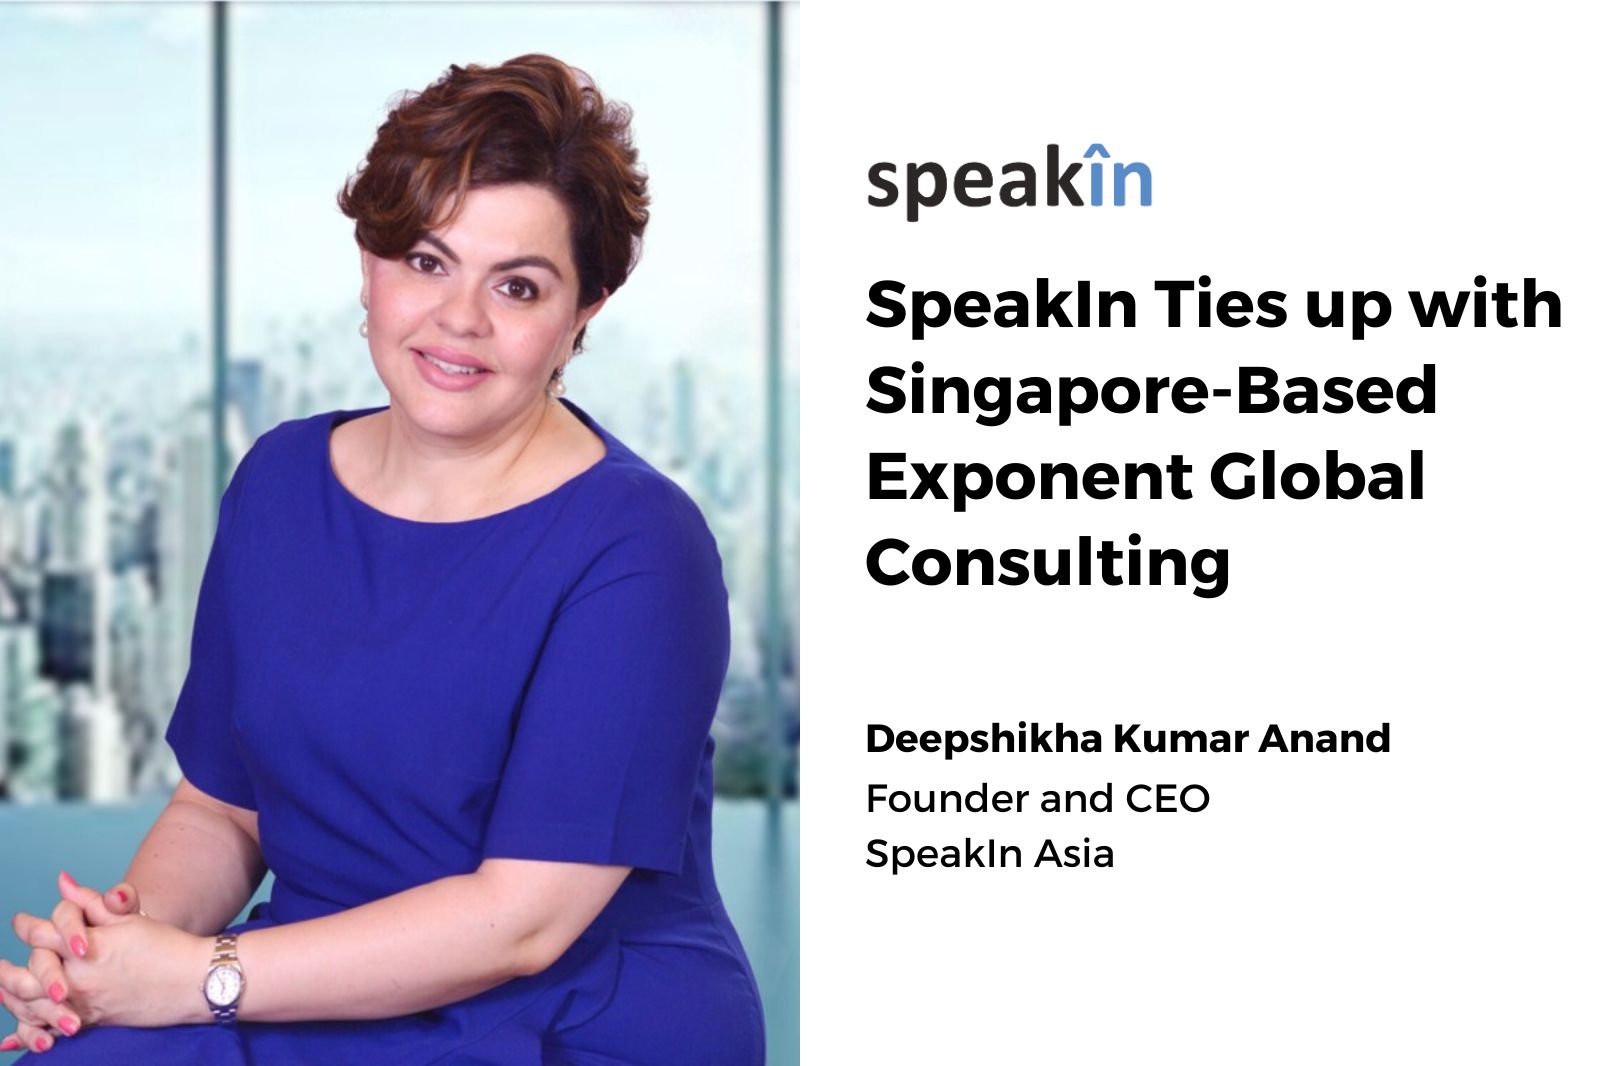 Asia’s Largest Professional Learning Platform - SpeakIn Ties up with Singapore-Based Exponent Global Consulting